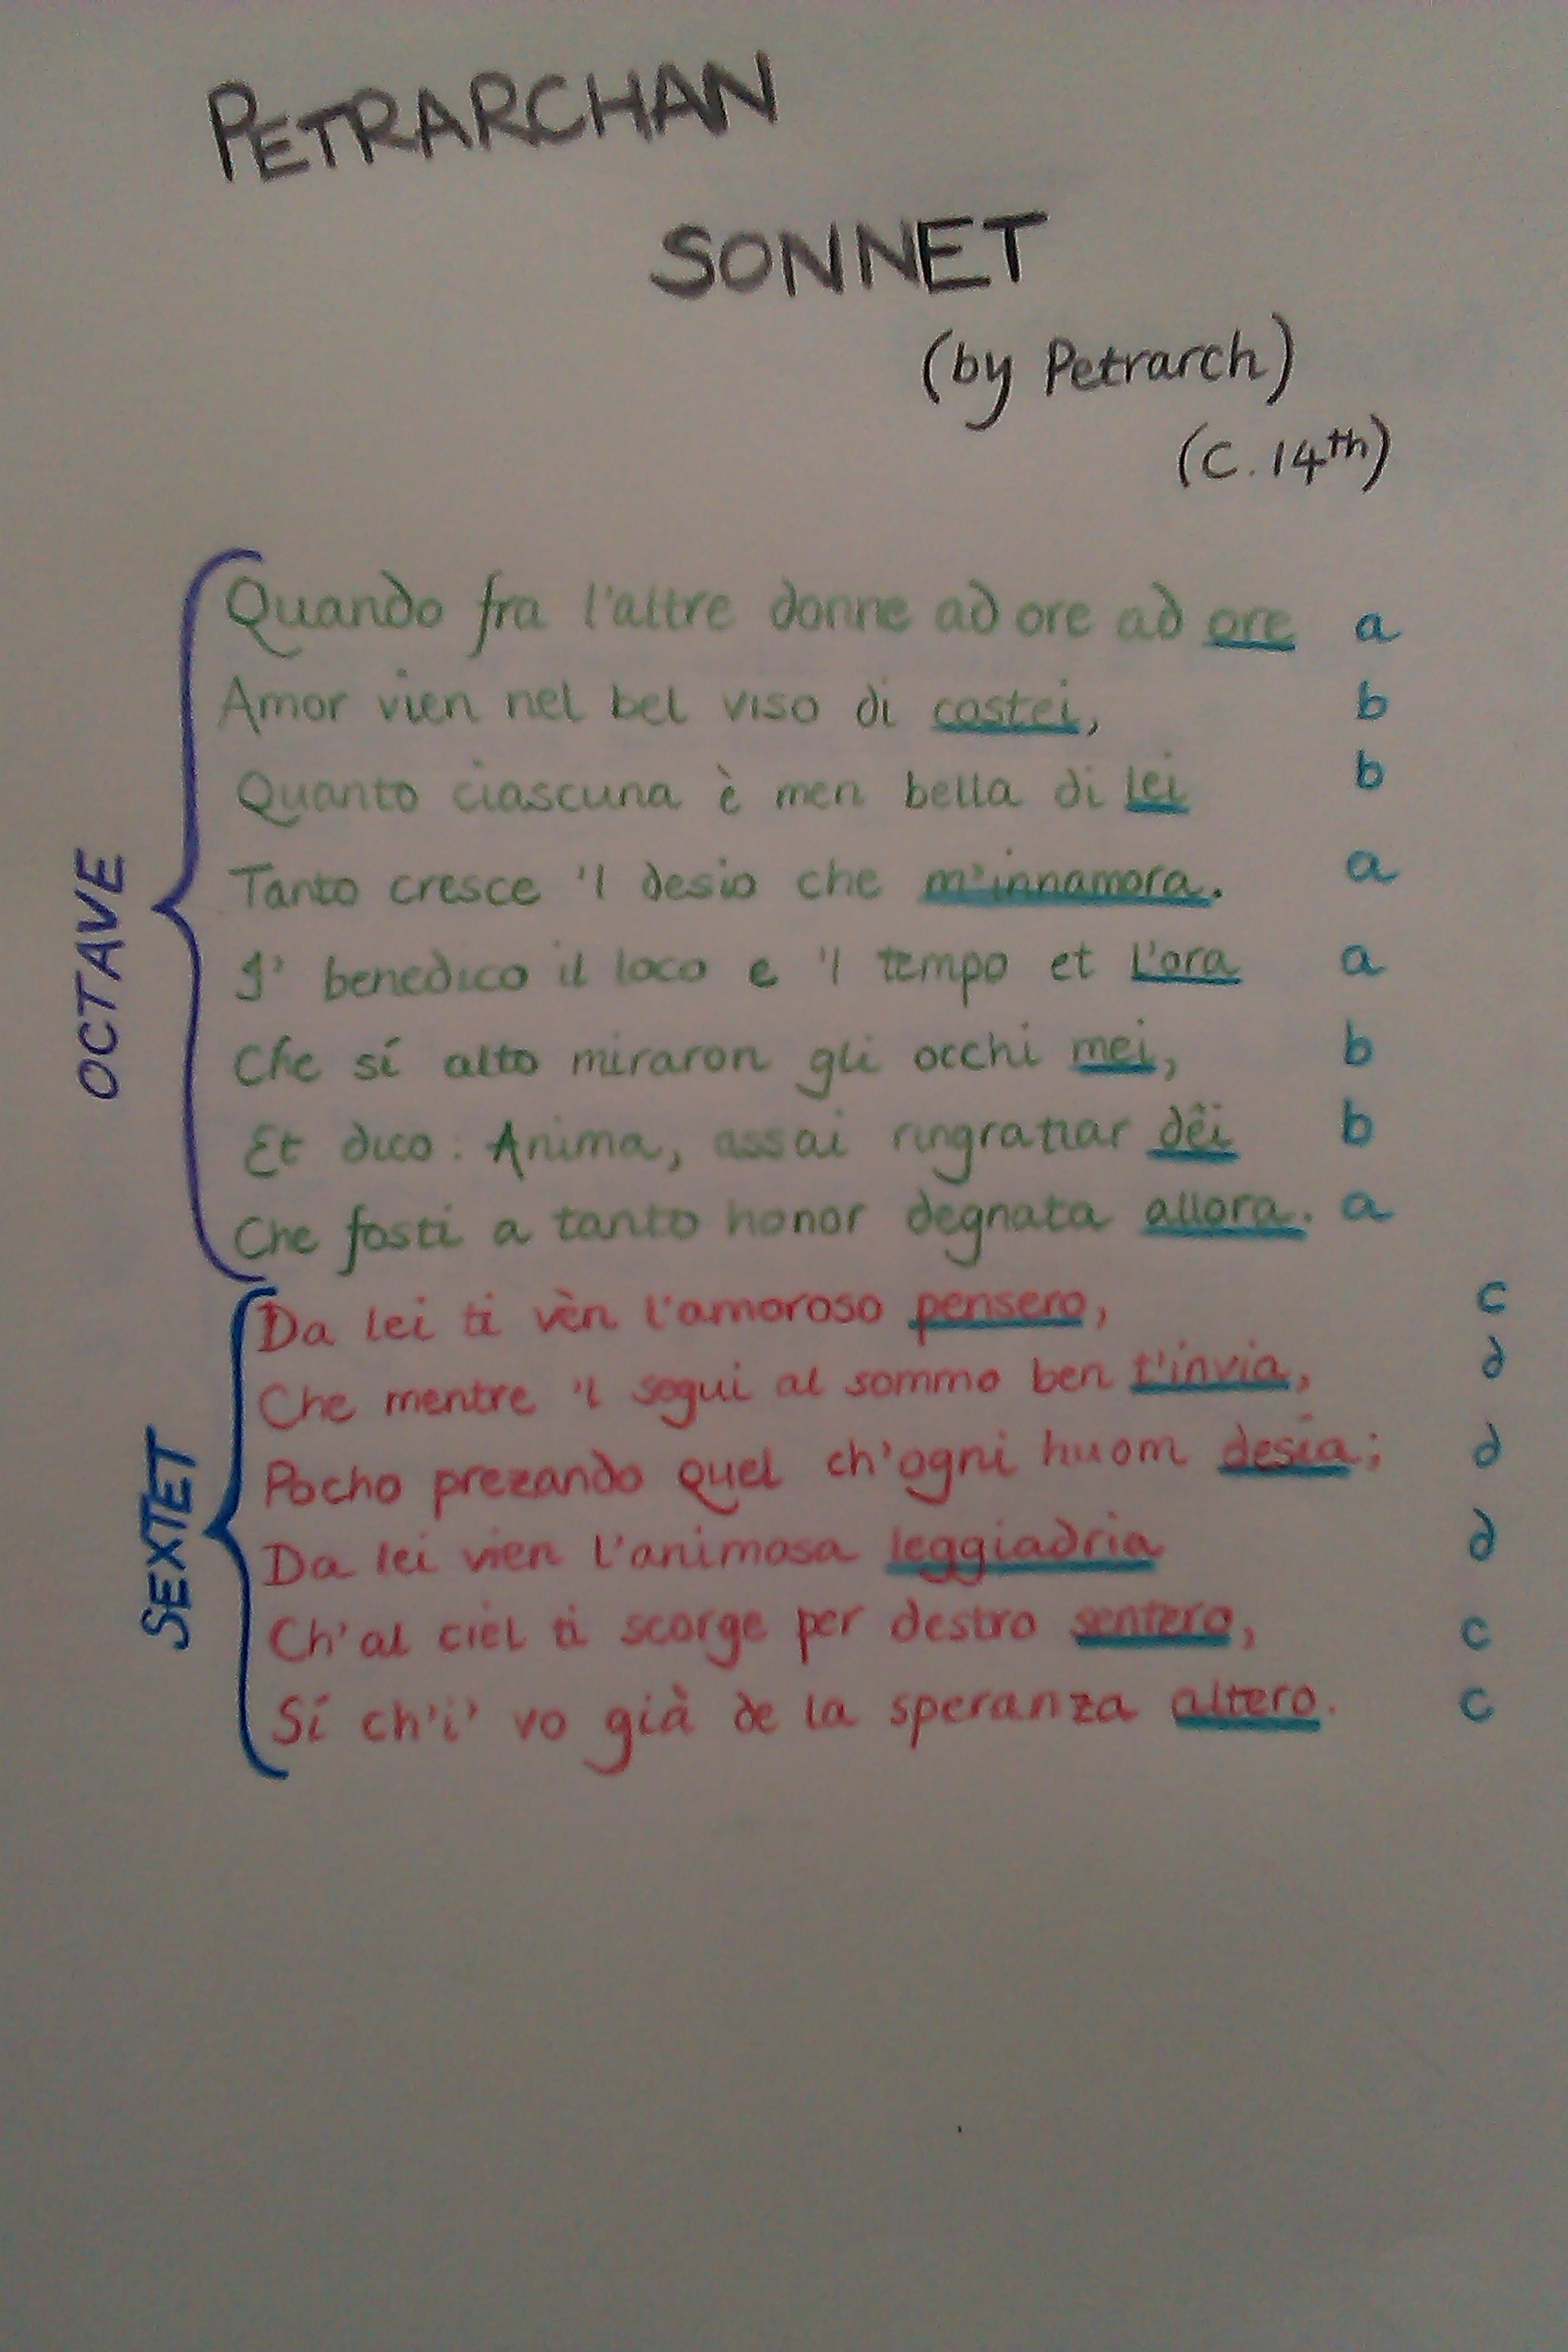 How to write an english sonnet